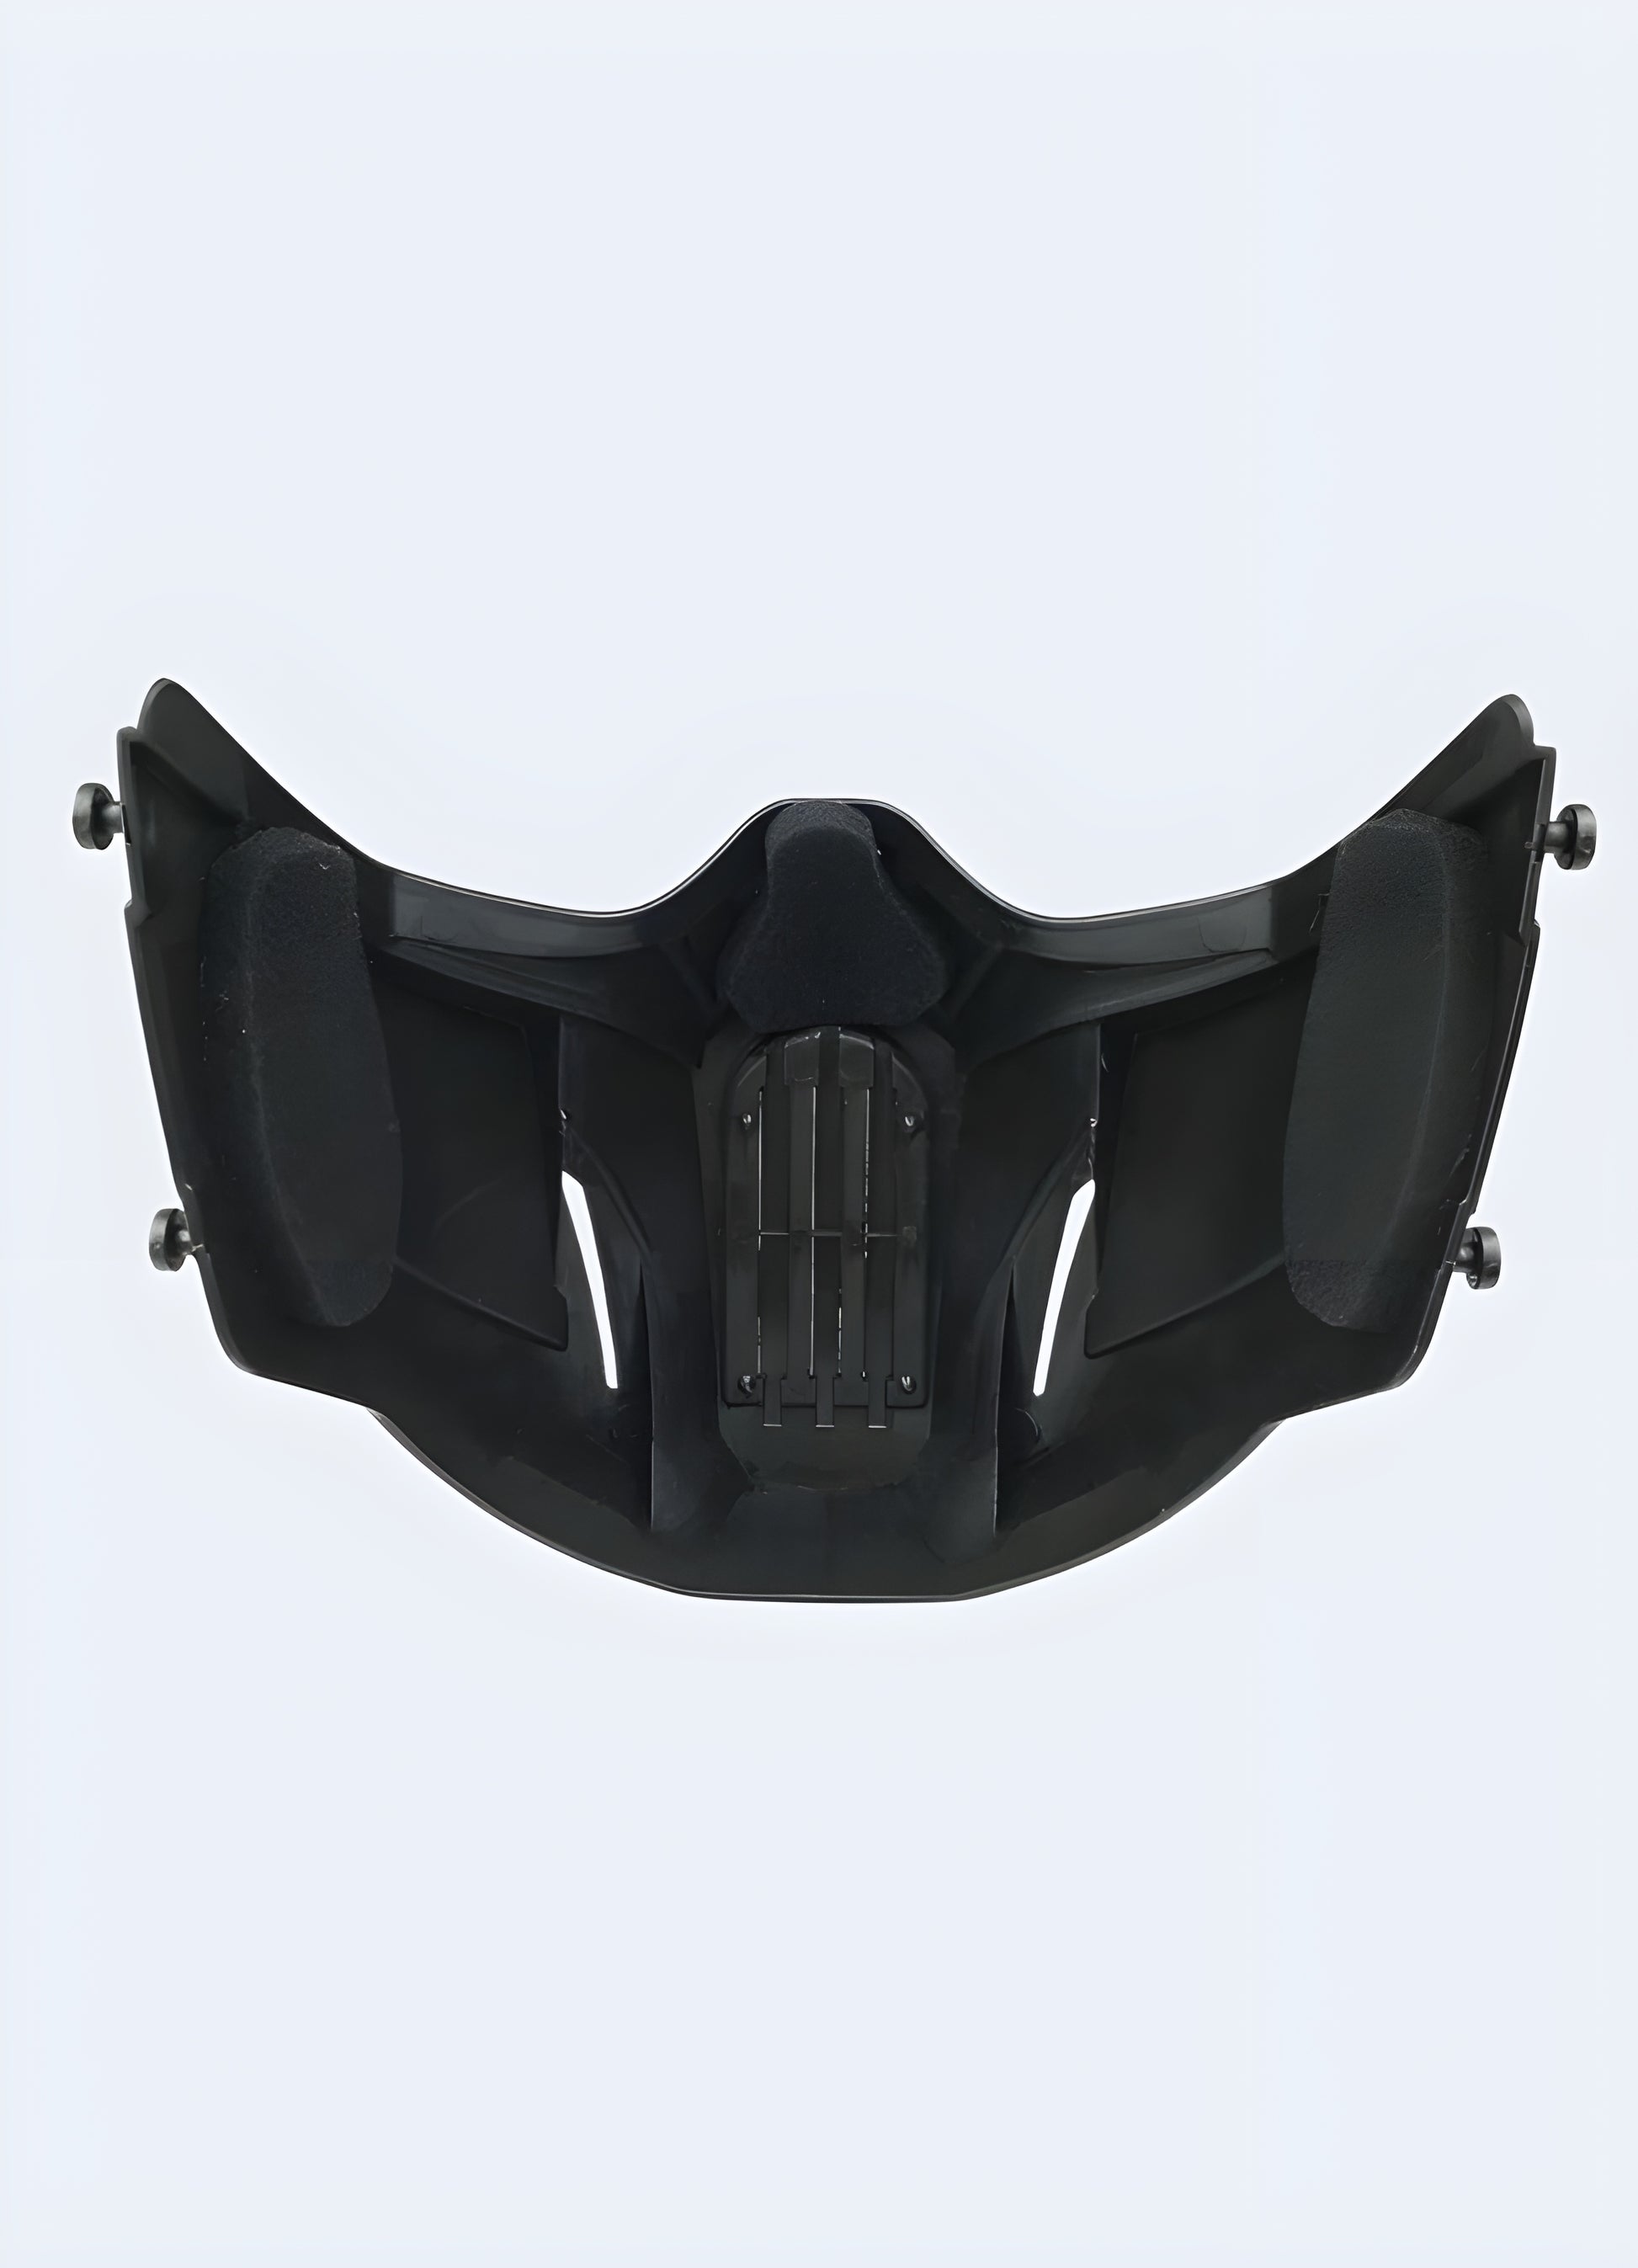  Comfortable and breathable, yet bold, this mask resonates with the spirit of modern-day warriors.